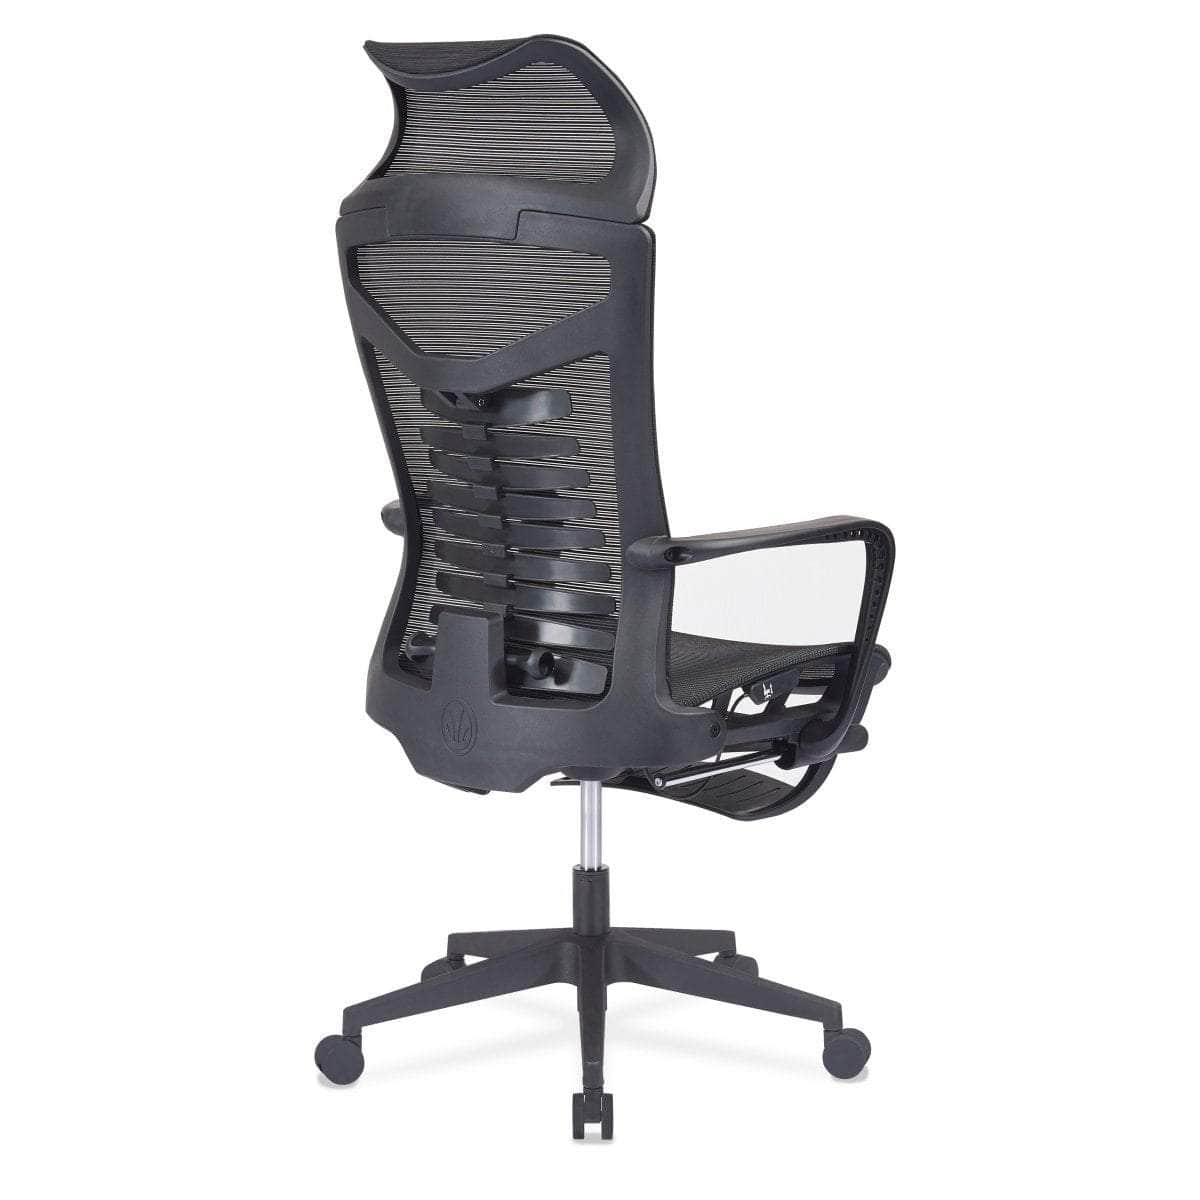 Egcx-K339L Ergonomic Office Chair Seat Adjustable Height Mesh Chair Back Support Footrest